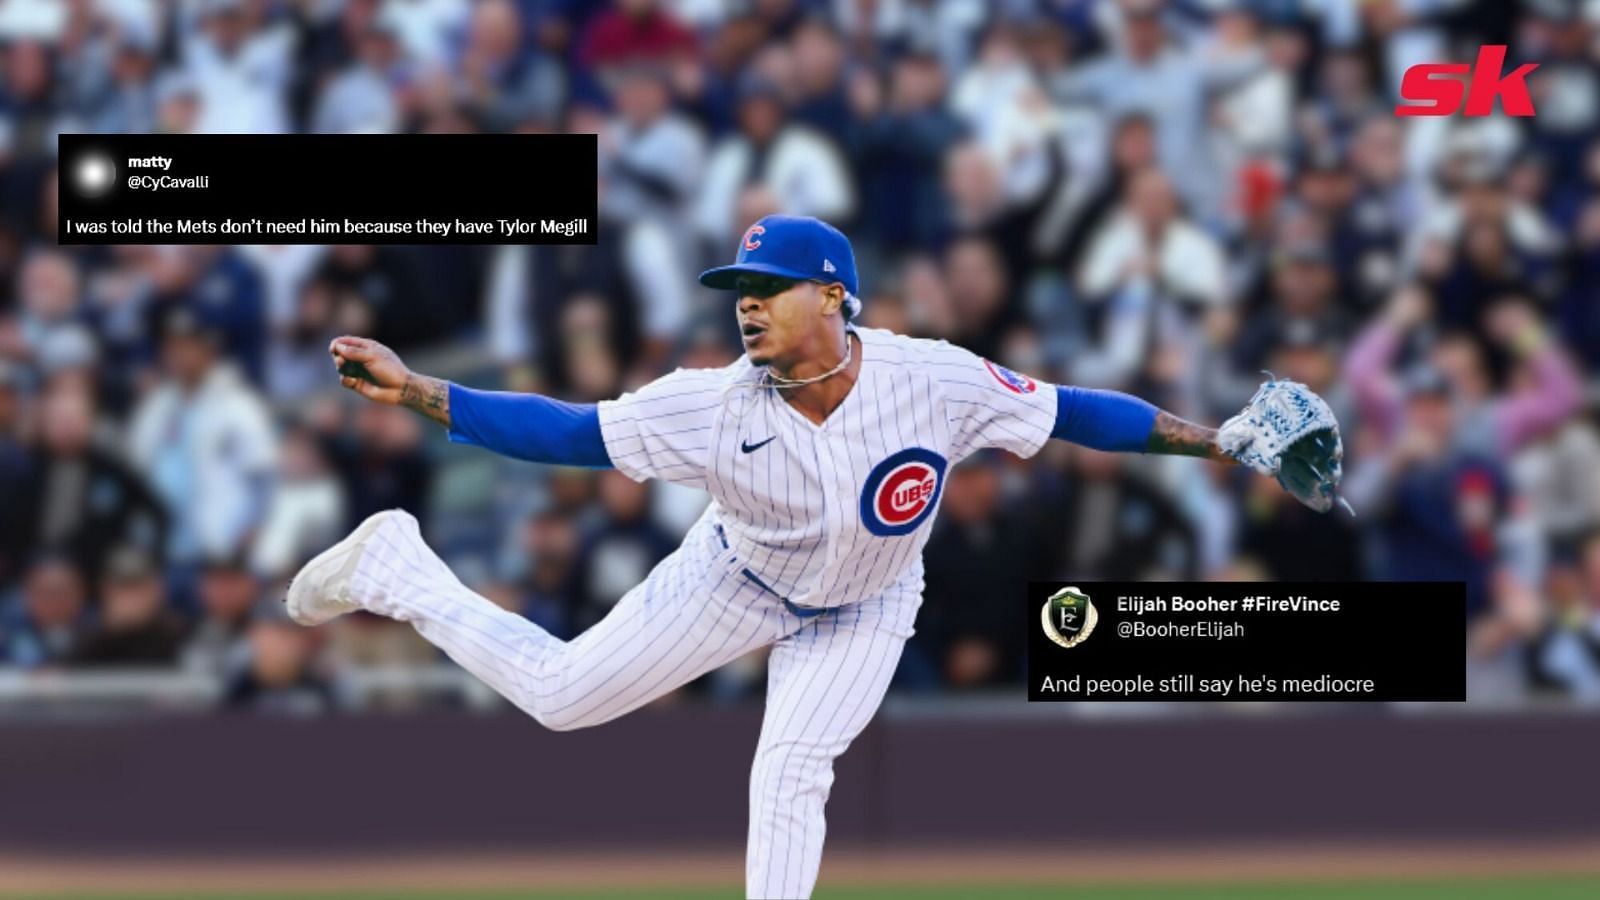 Cubs' Marcus Stroman throws one-hitter vs. Rays - ESPN